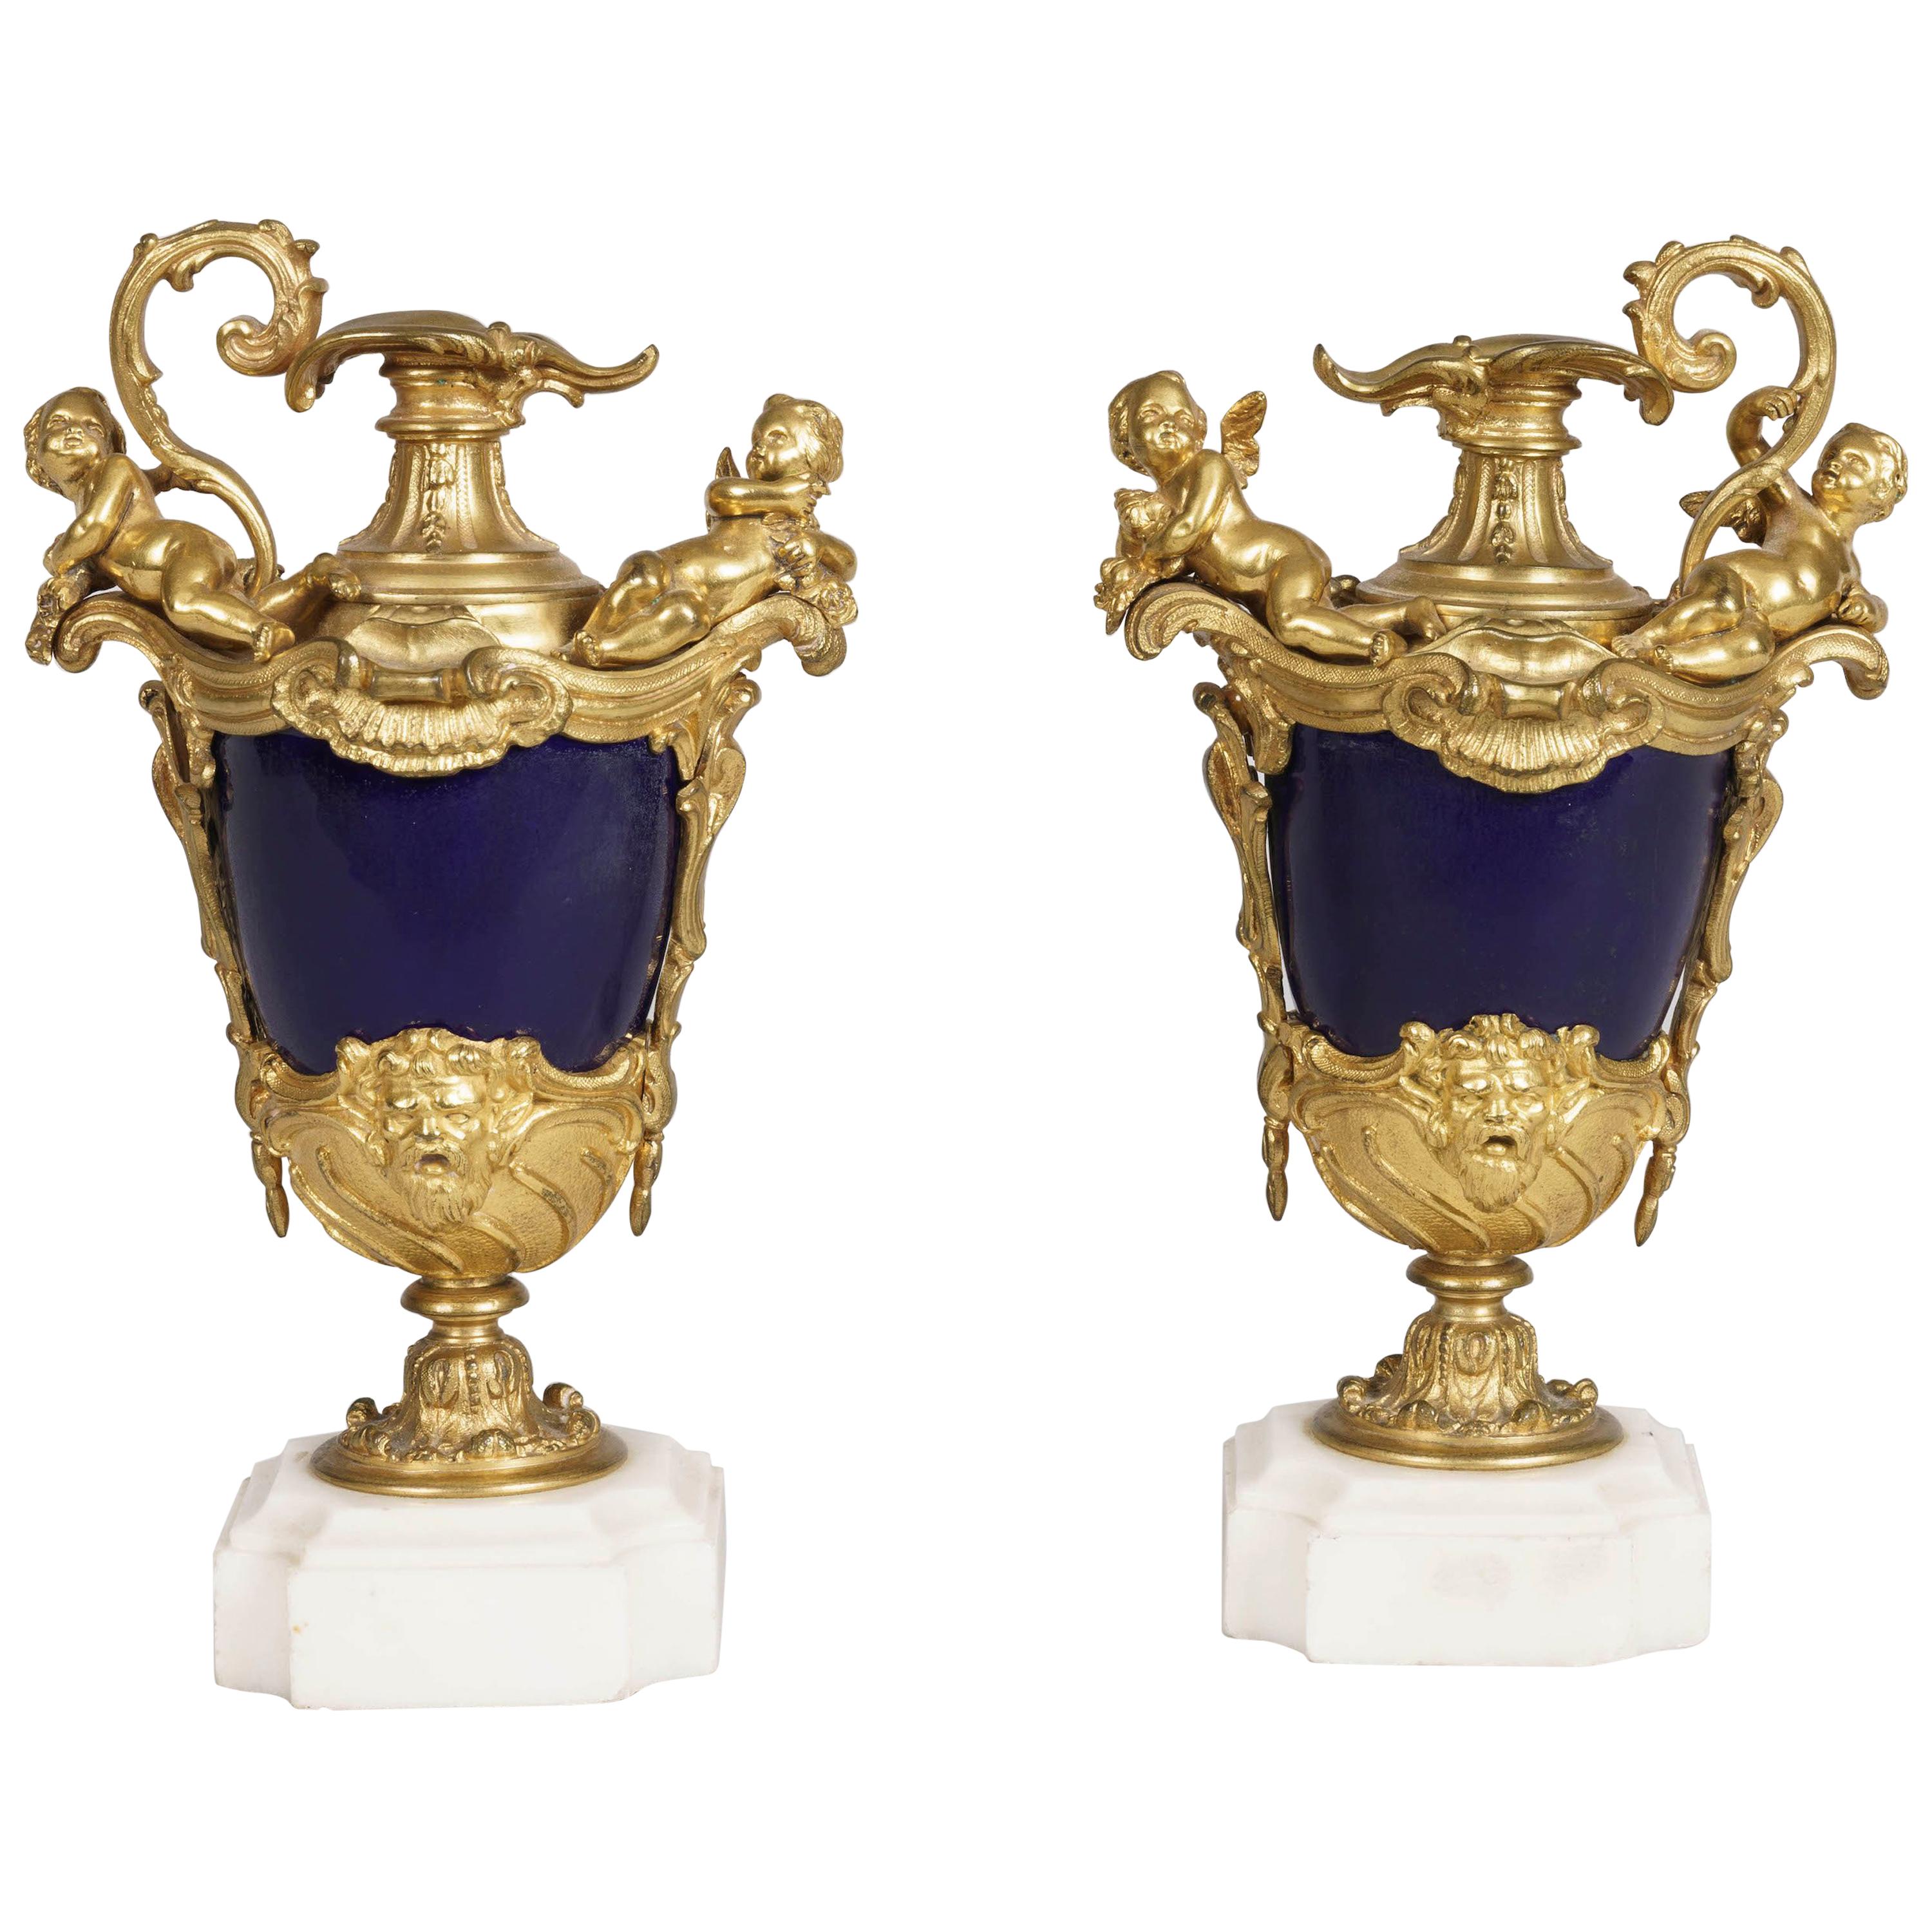 Antique Pair of Decorative Vases in Royal Blue Porcelain and Gilt For Sale